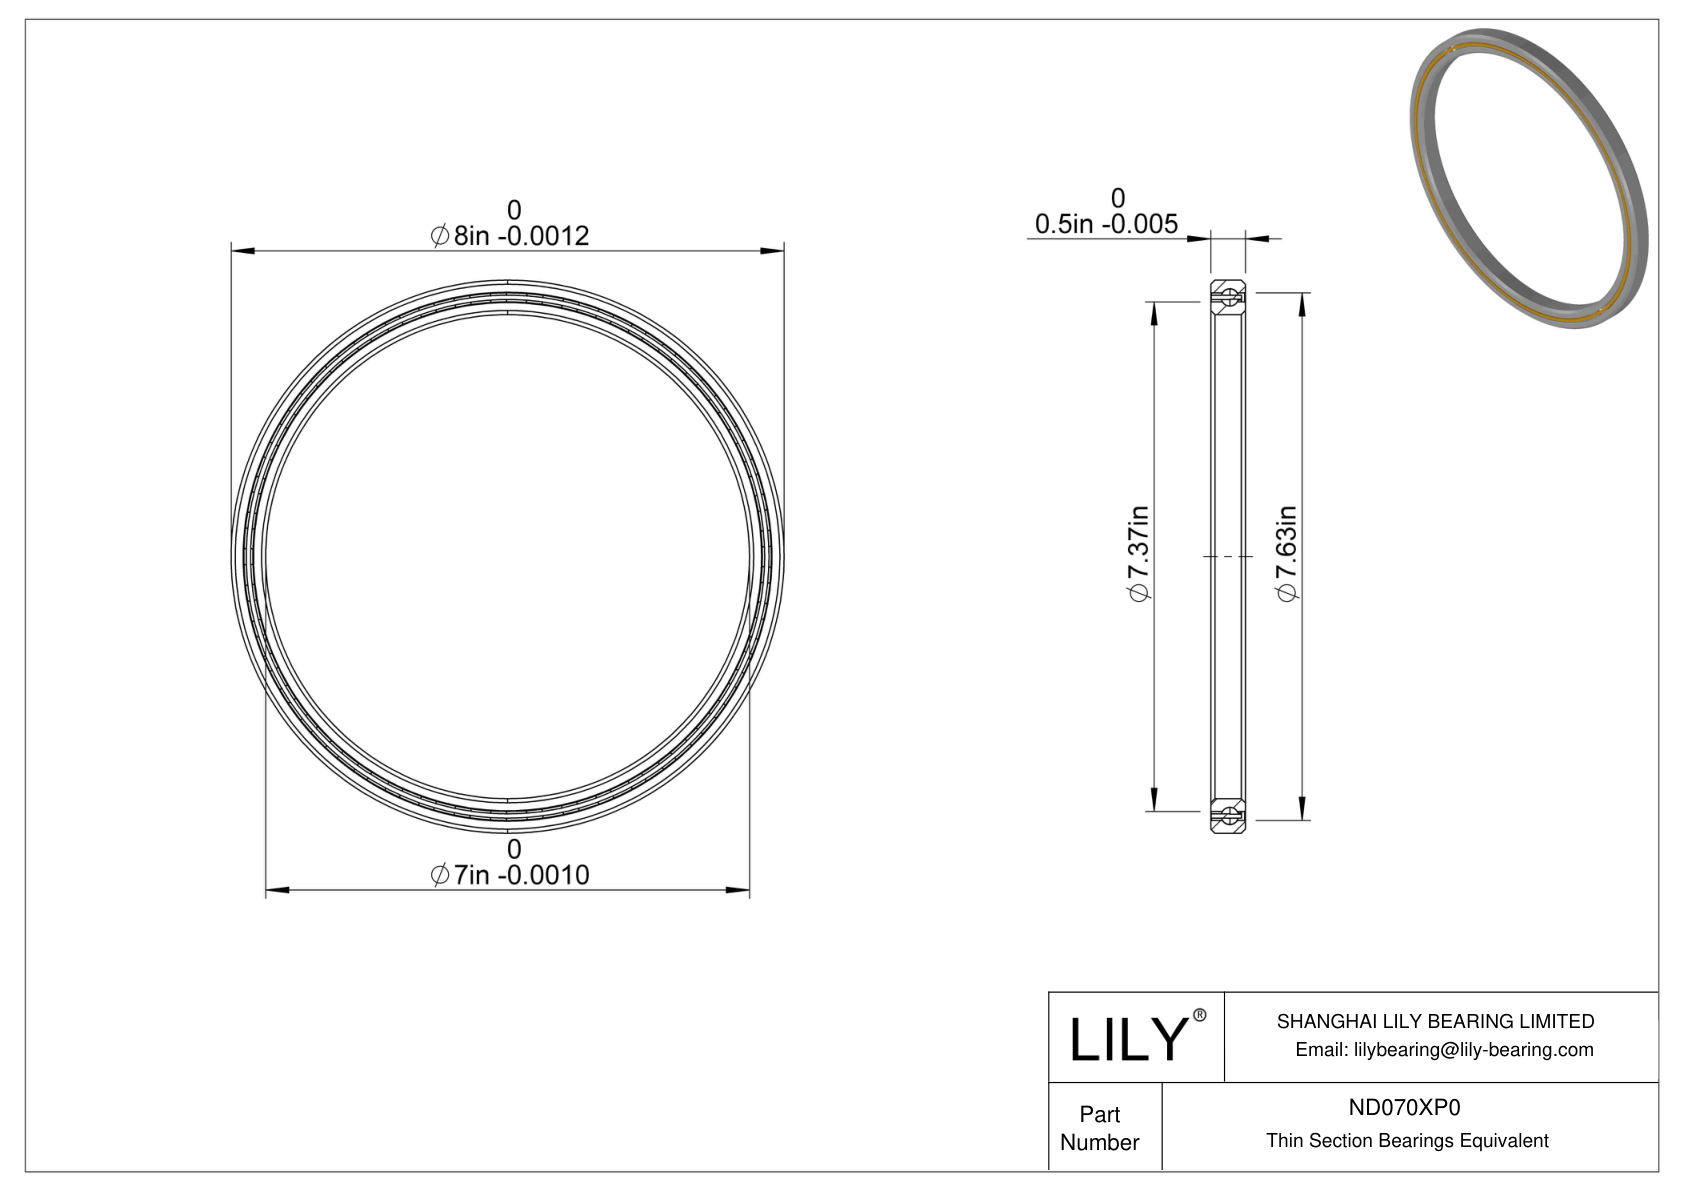 ND070XP0 Constant Section (CS) Bearings cad drawing